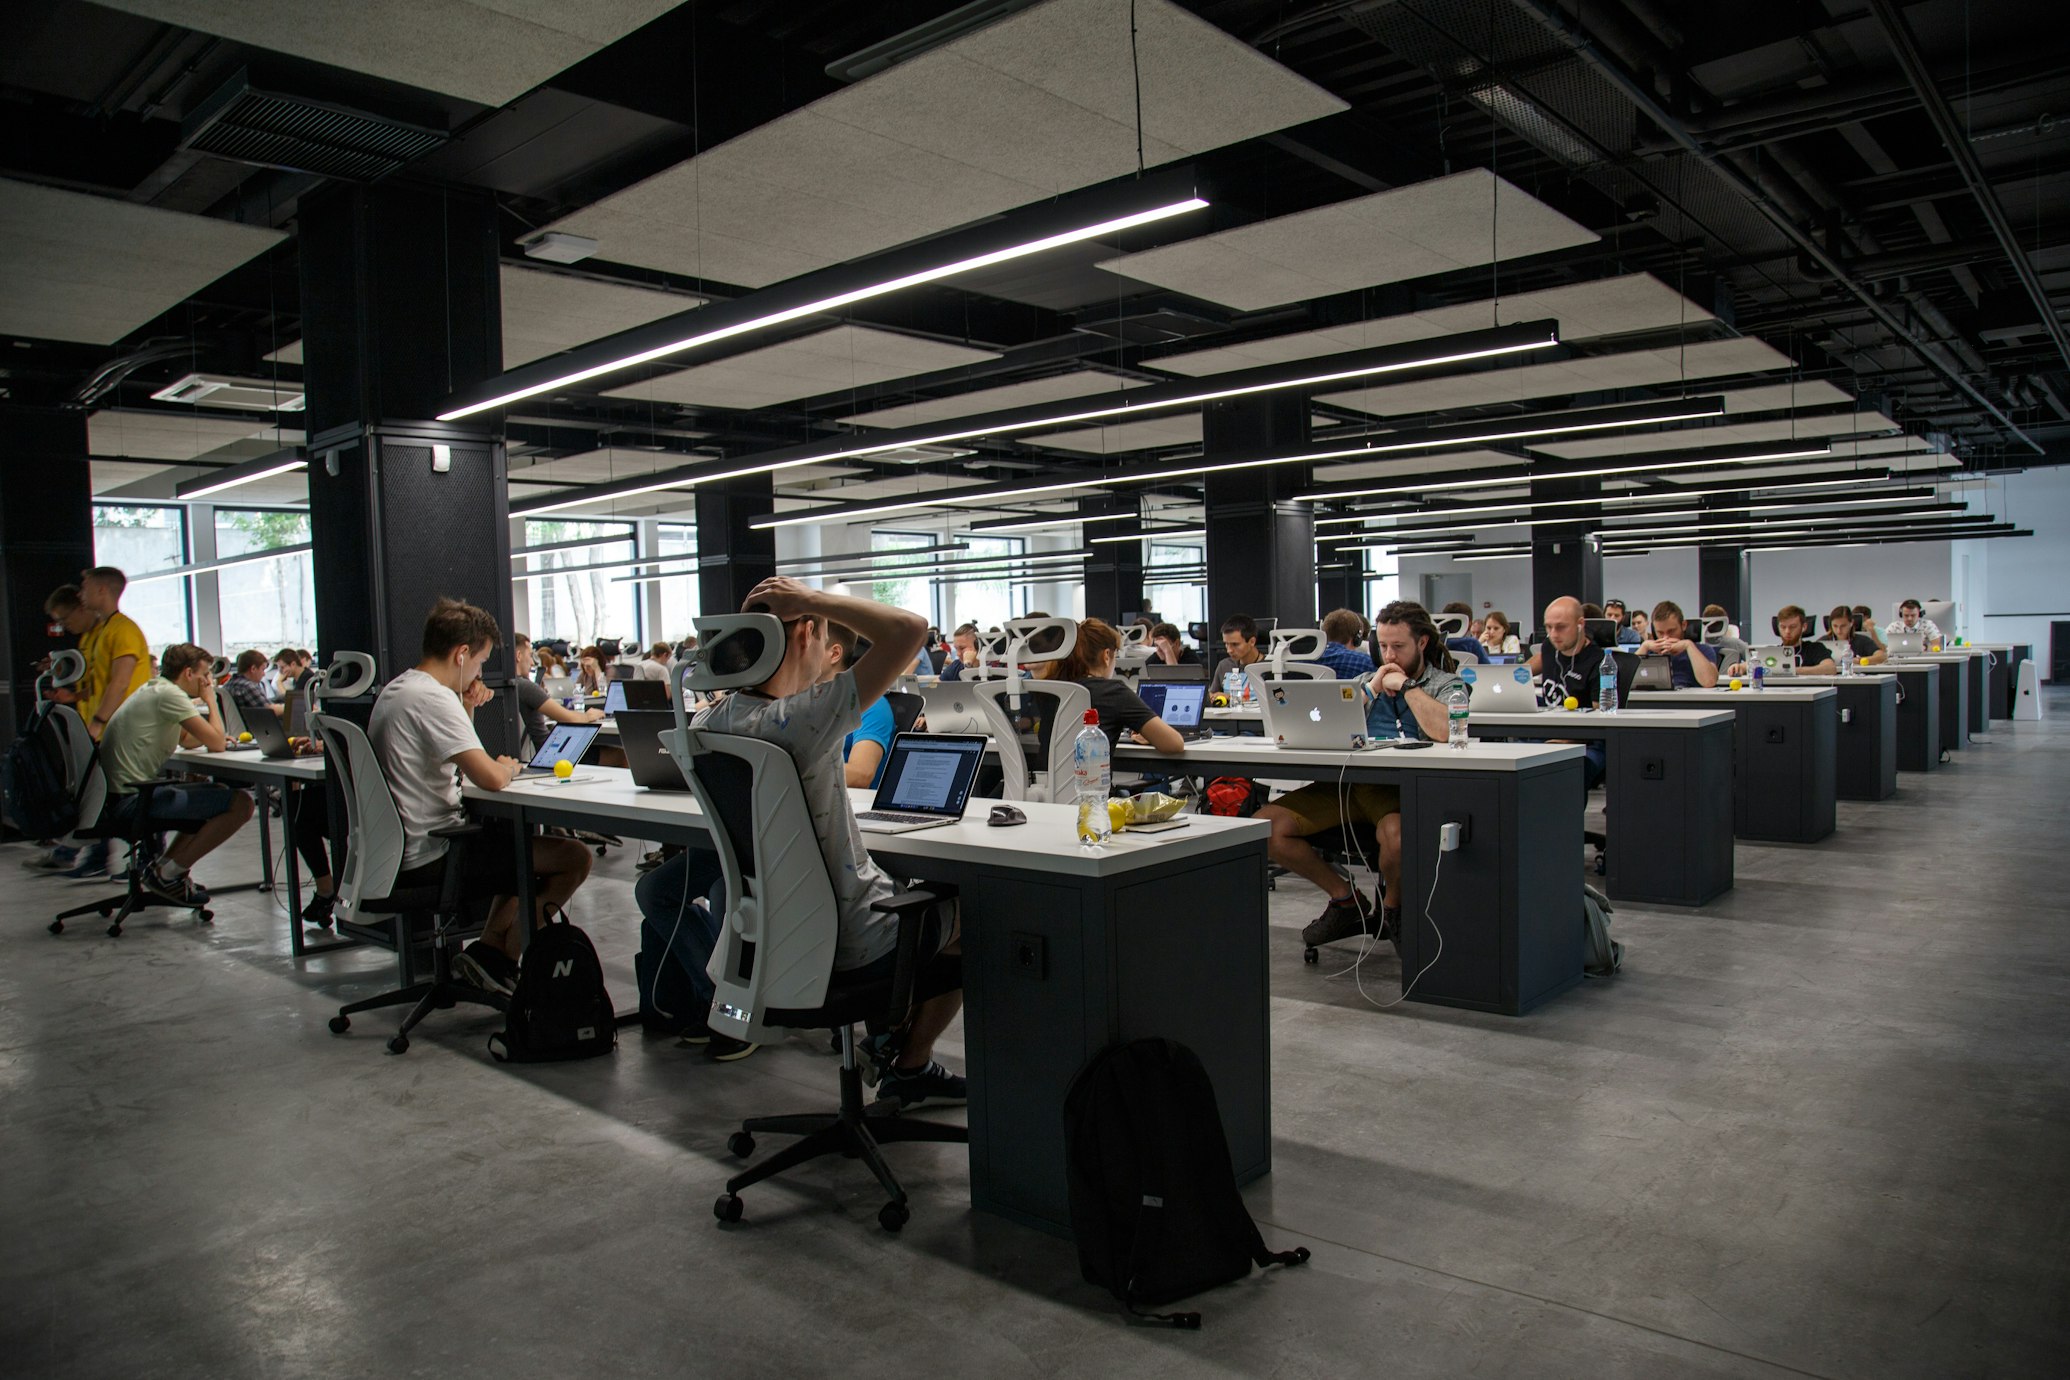 Header Image - Office with people working